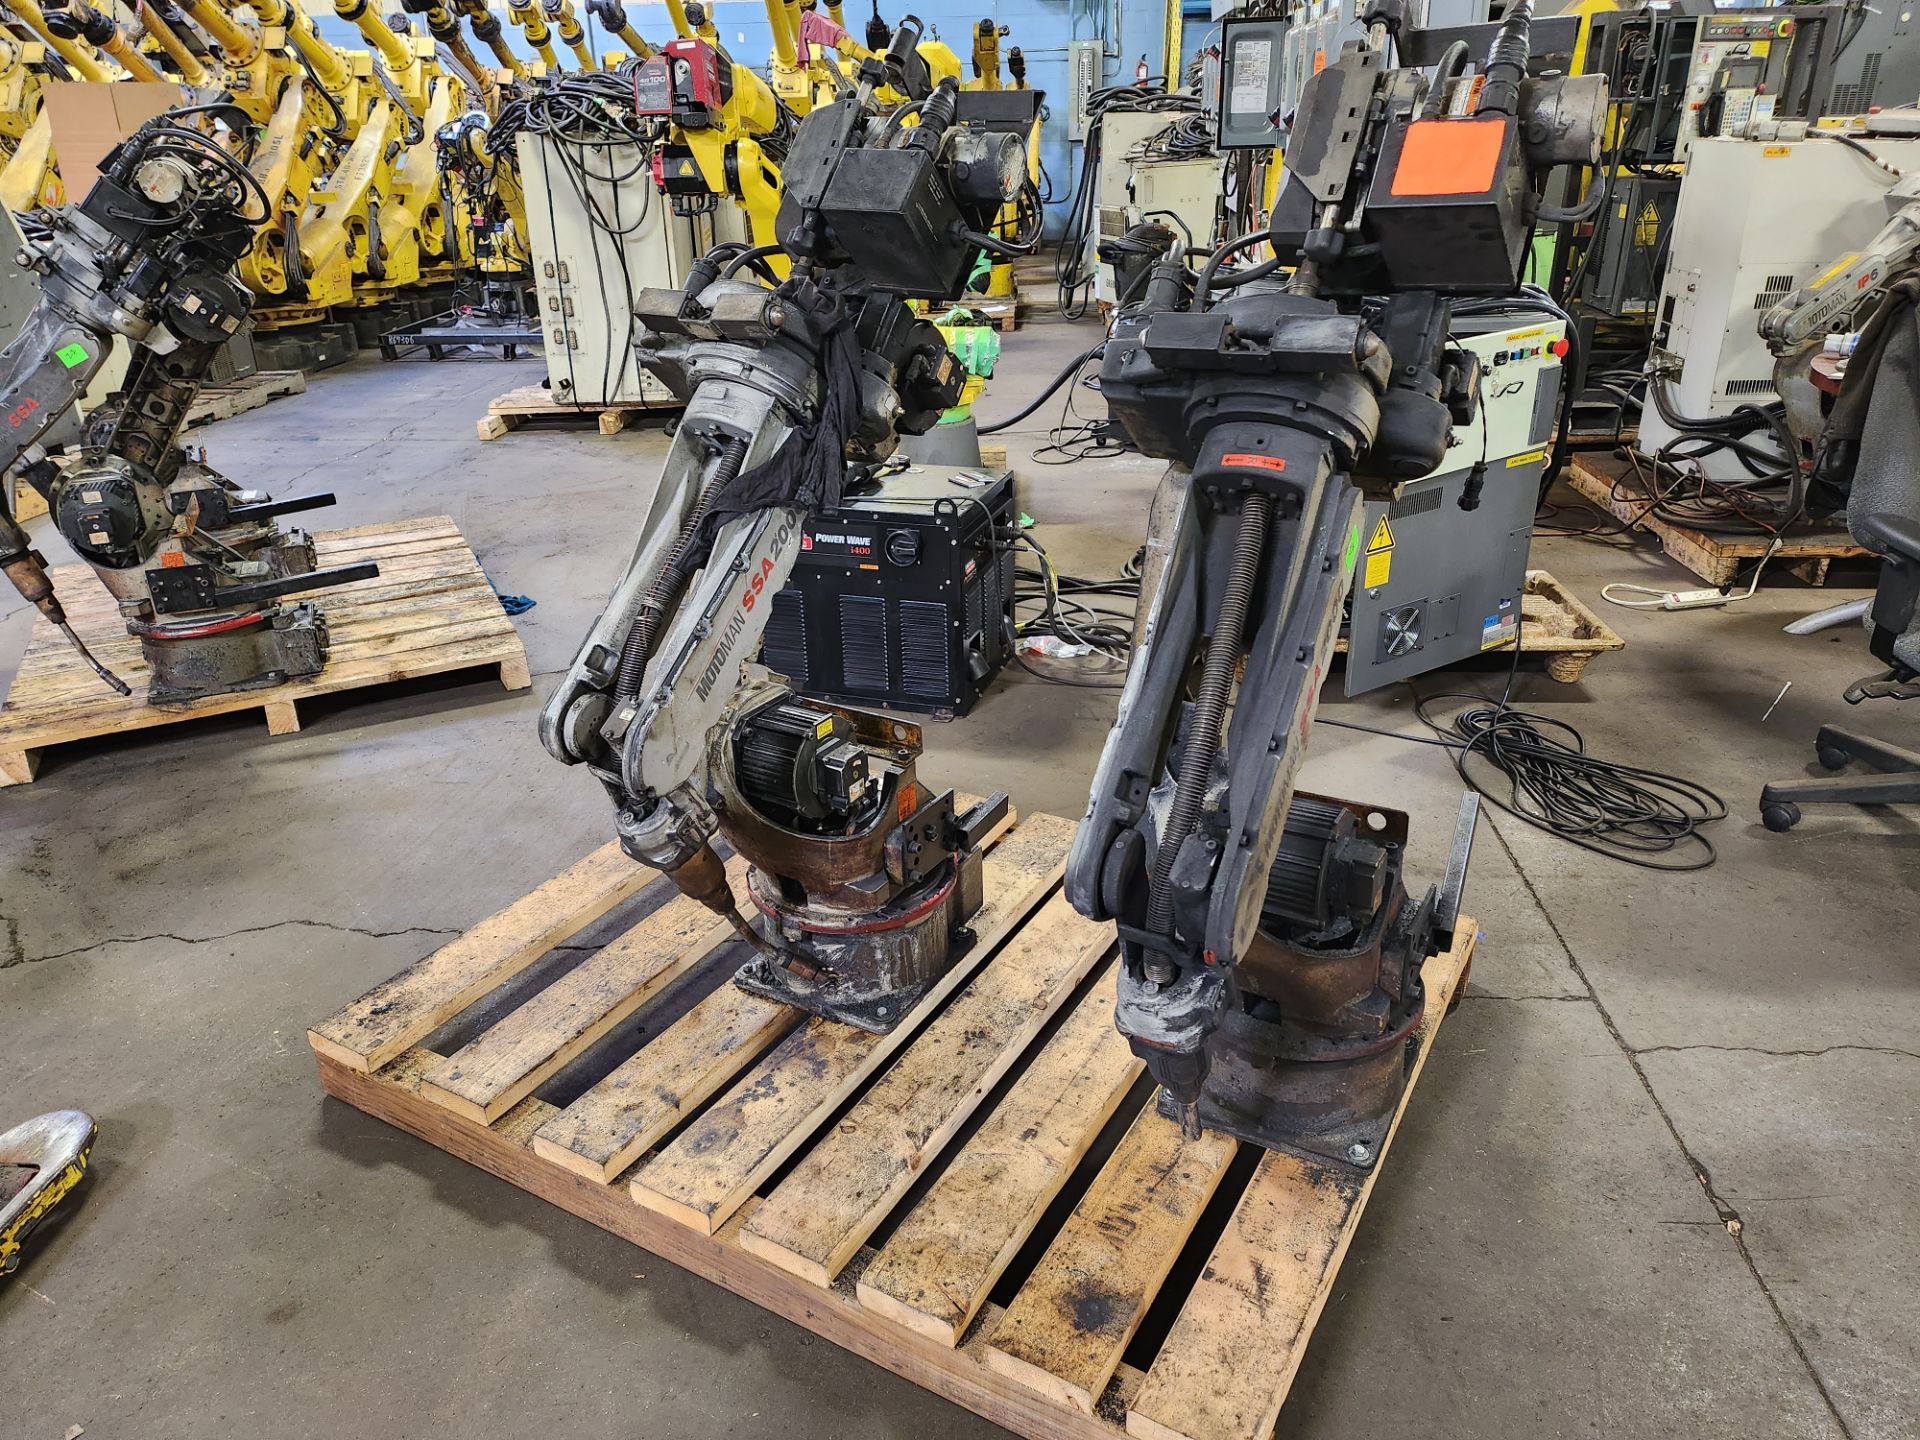 Lot of 4 (4 units) 2007 Motoman SSA 2000 Welding Robots Complete with Auto Axcess 450 Welding - Image 2 of 5